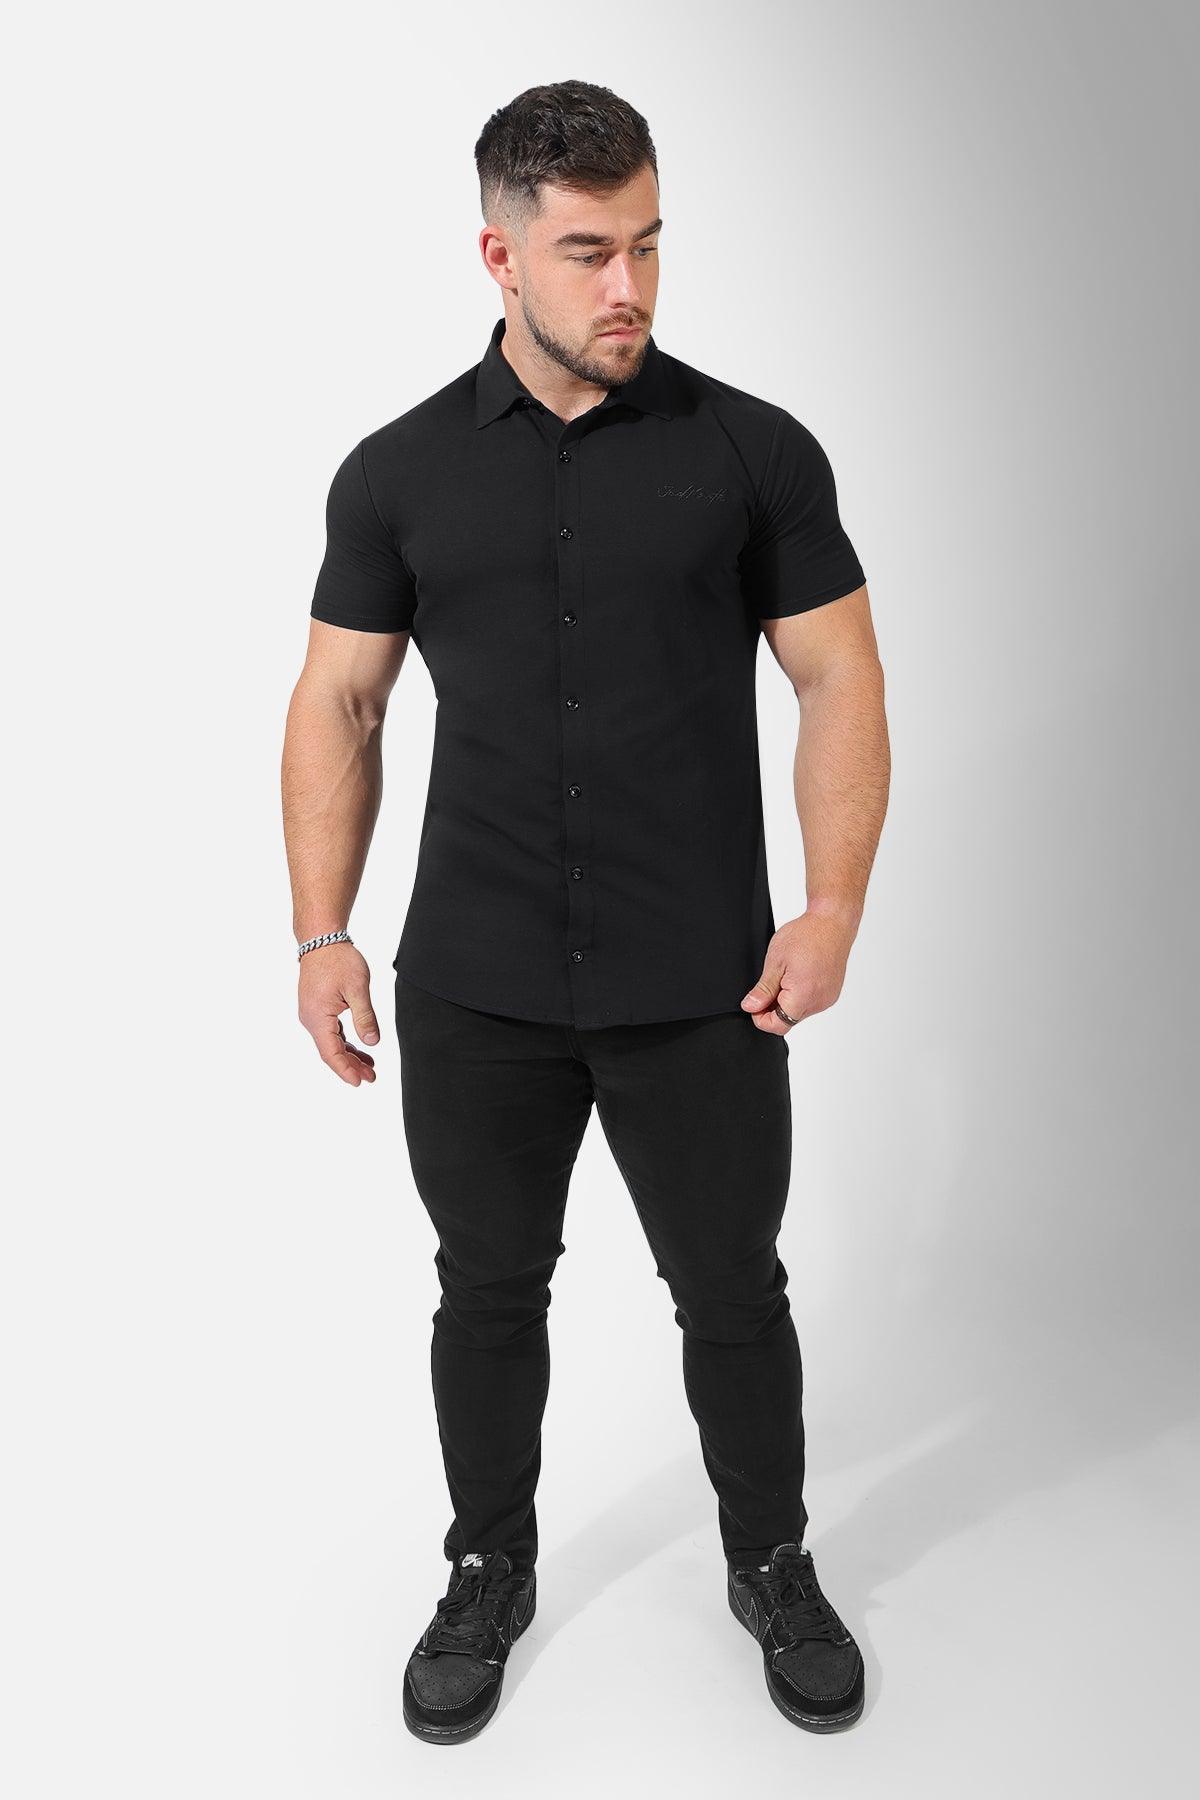 Button-up Muscle T-Shirt - Black - Jed North Canada